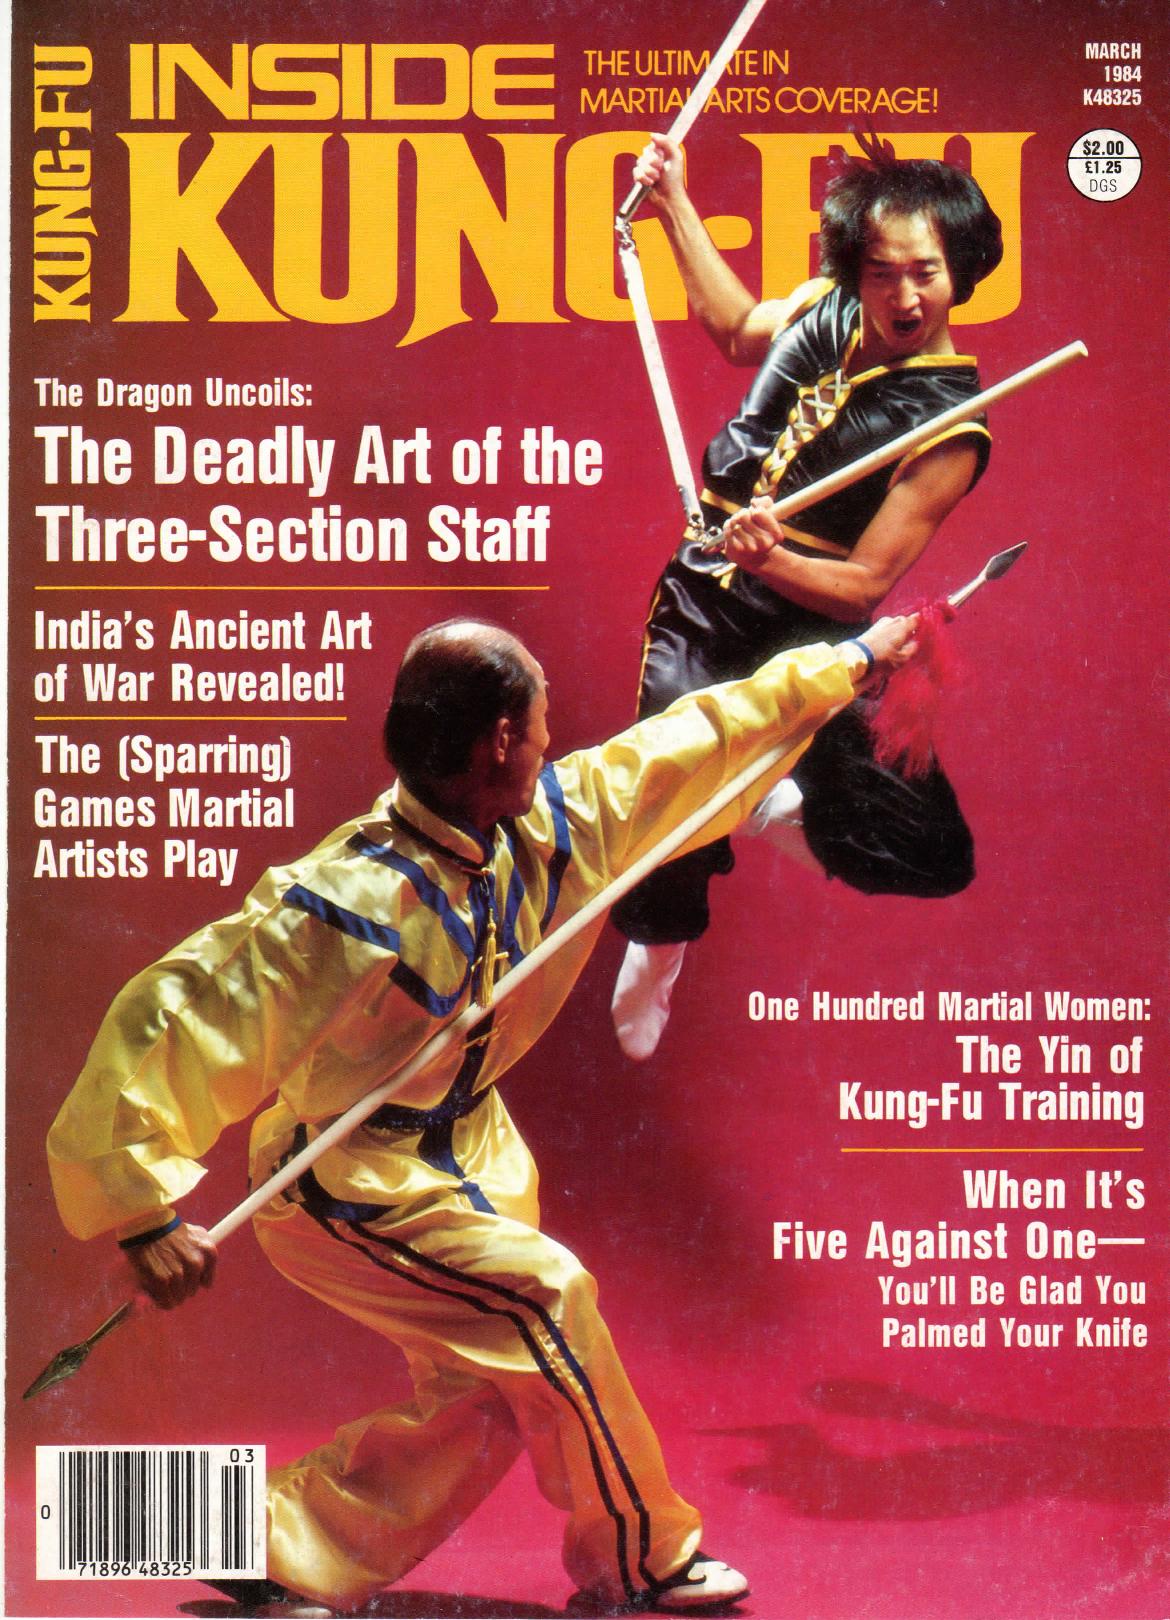 Inside Kung Fu Magazine March 1984 84/03   *COLLECTIBLE*